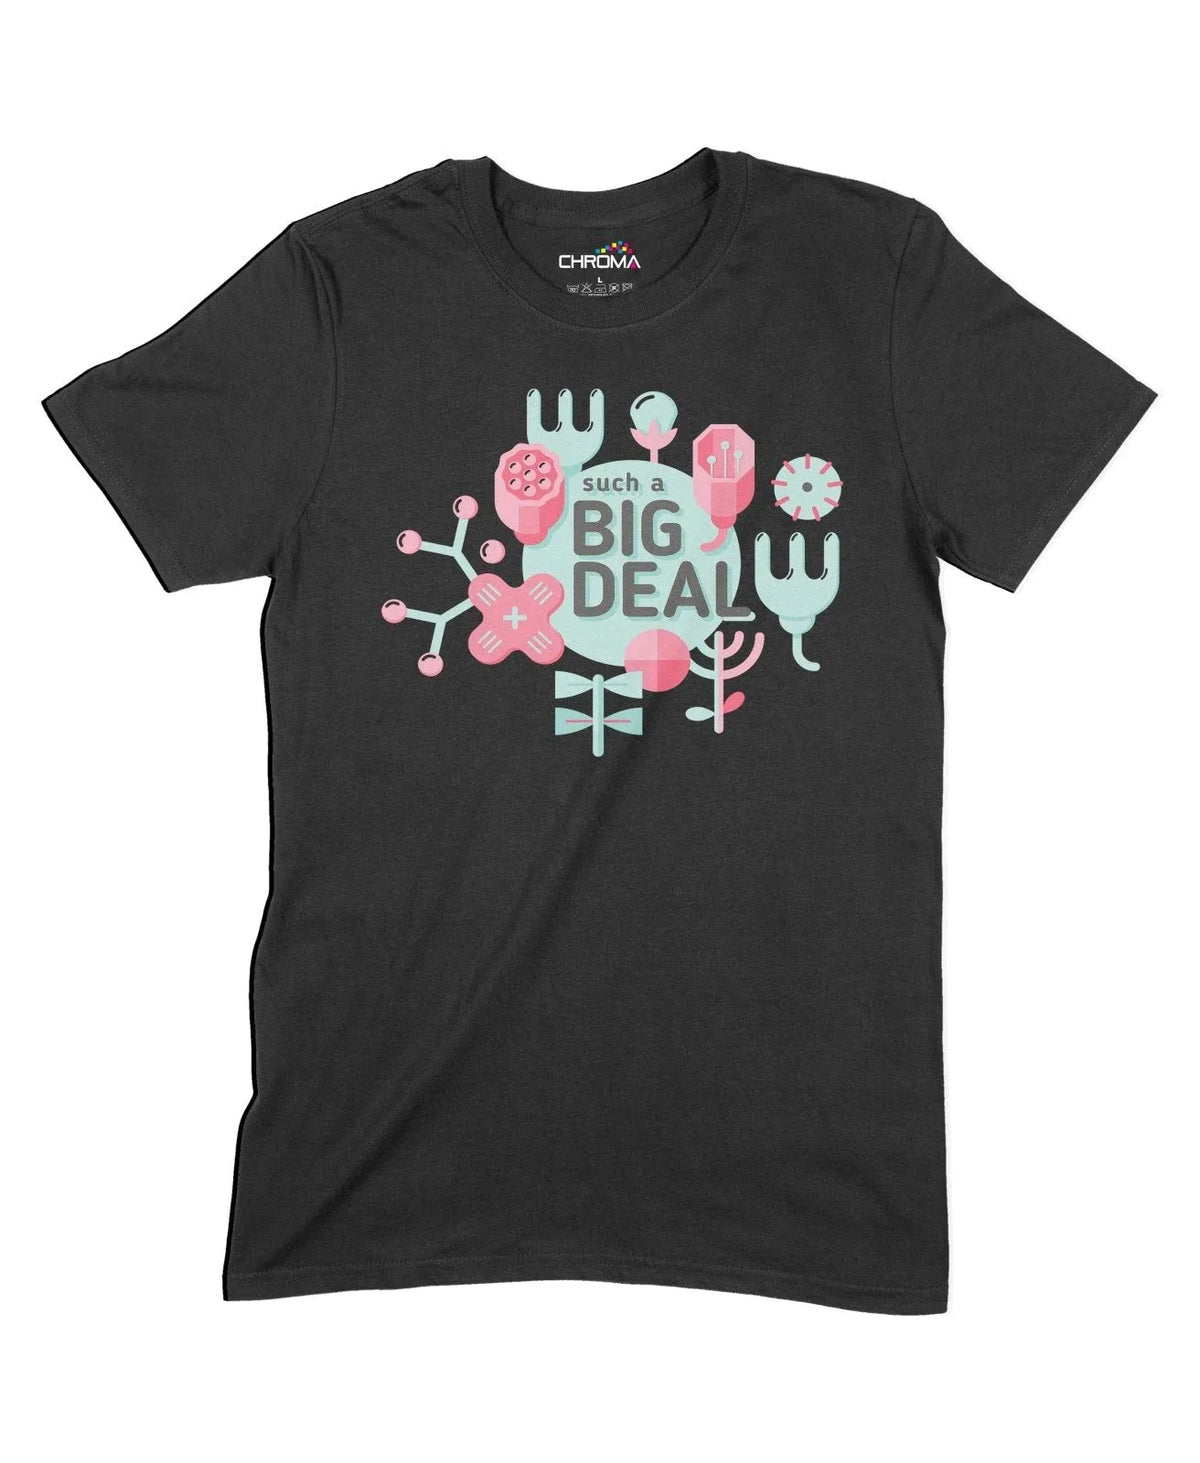 Such A Big Deal Unisex Adult T-Shirt Chroma Clothing